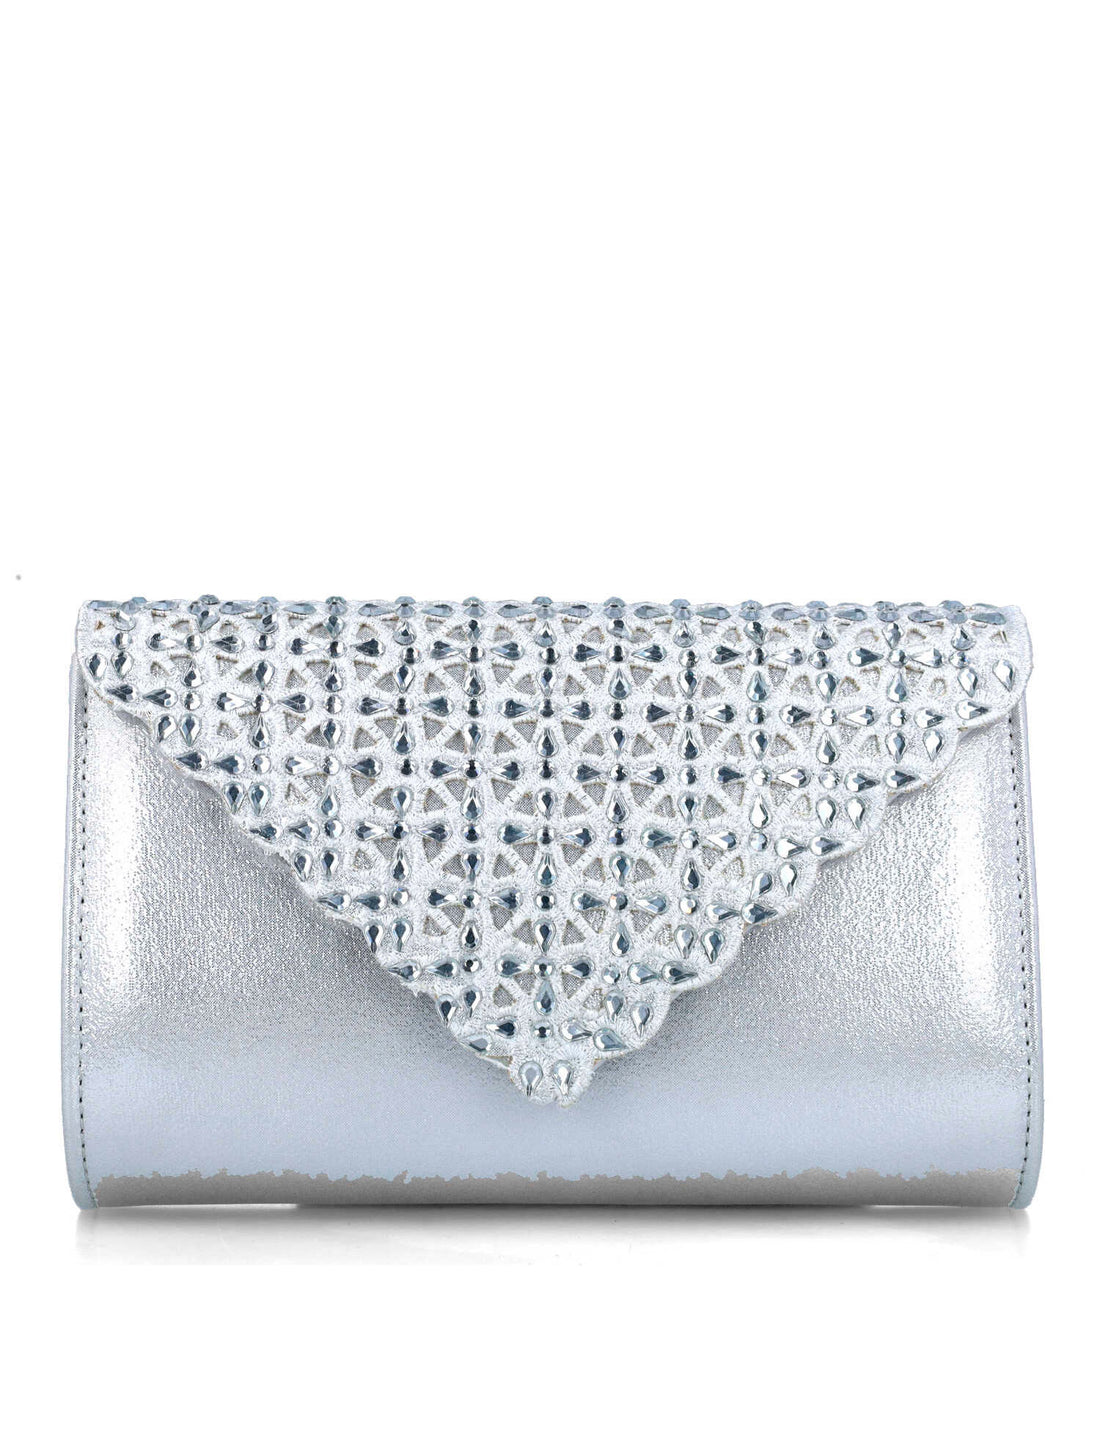 Silver Clutch With Embellished Flap_85540_09_01